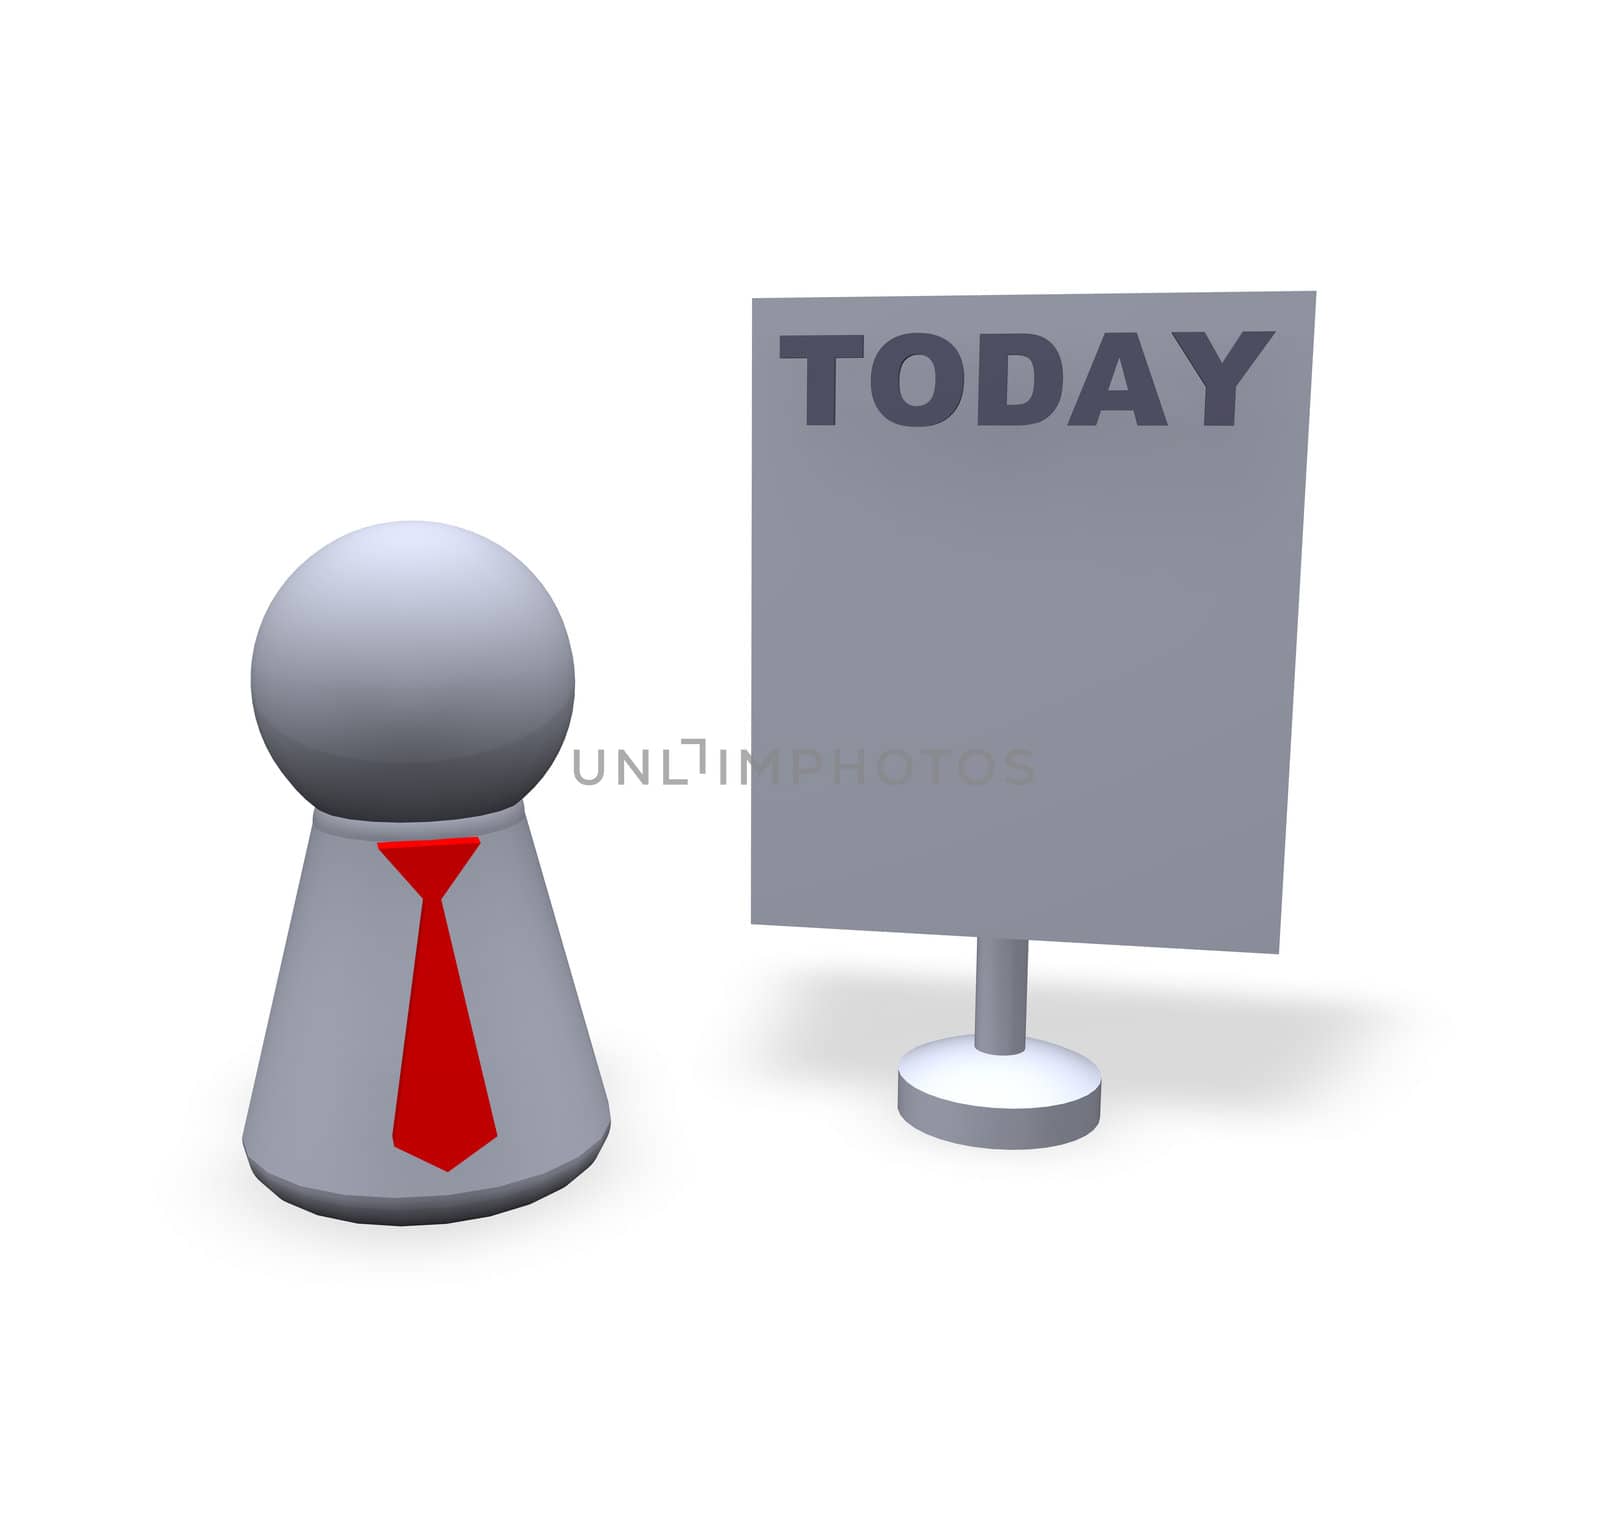 play figure with red tie and sign with today text